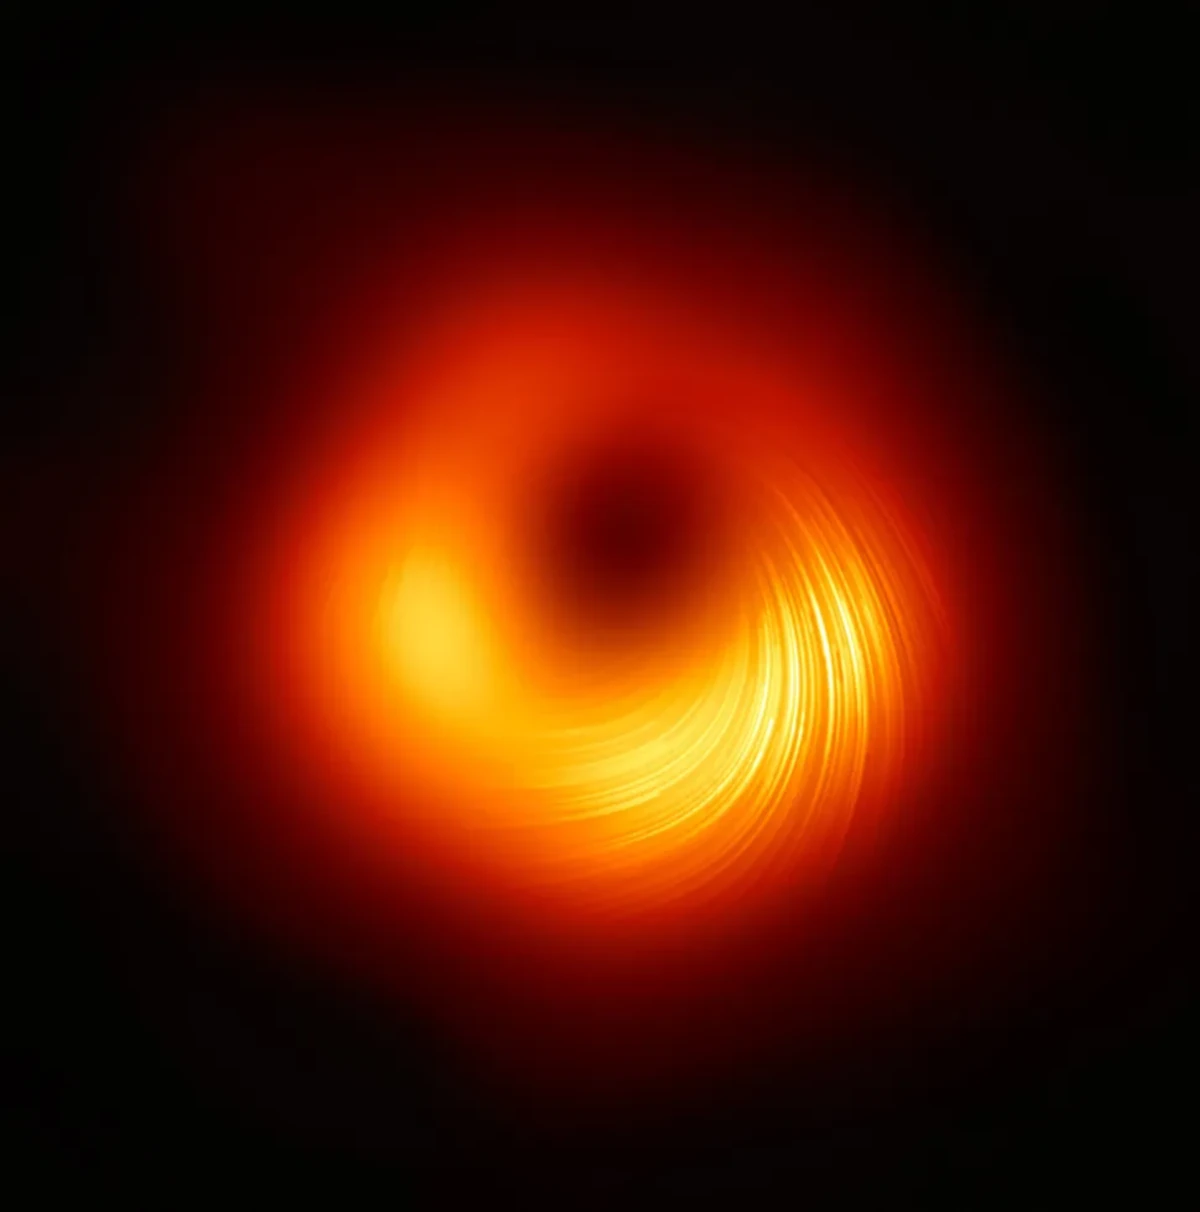 Recent studies by the EHT regarding the M87* black hole have led to a better understanding of how it either consumes or repels matter